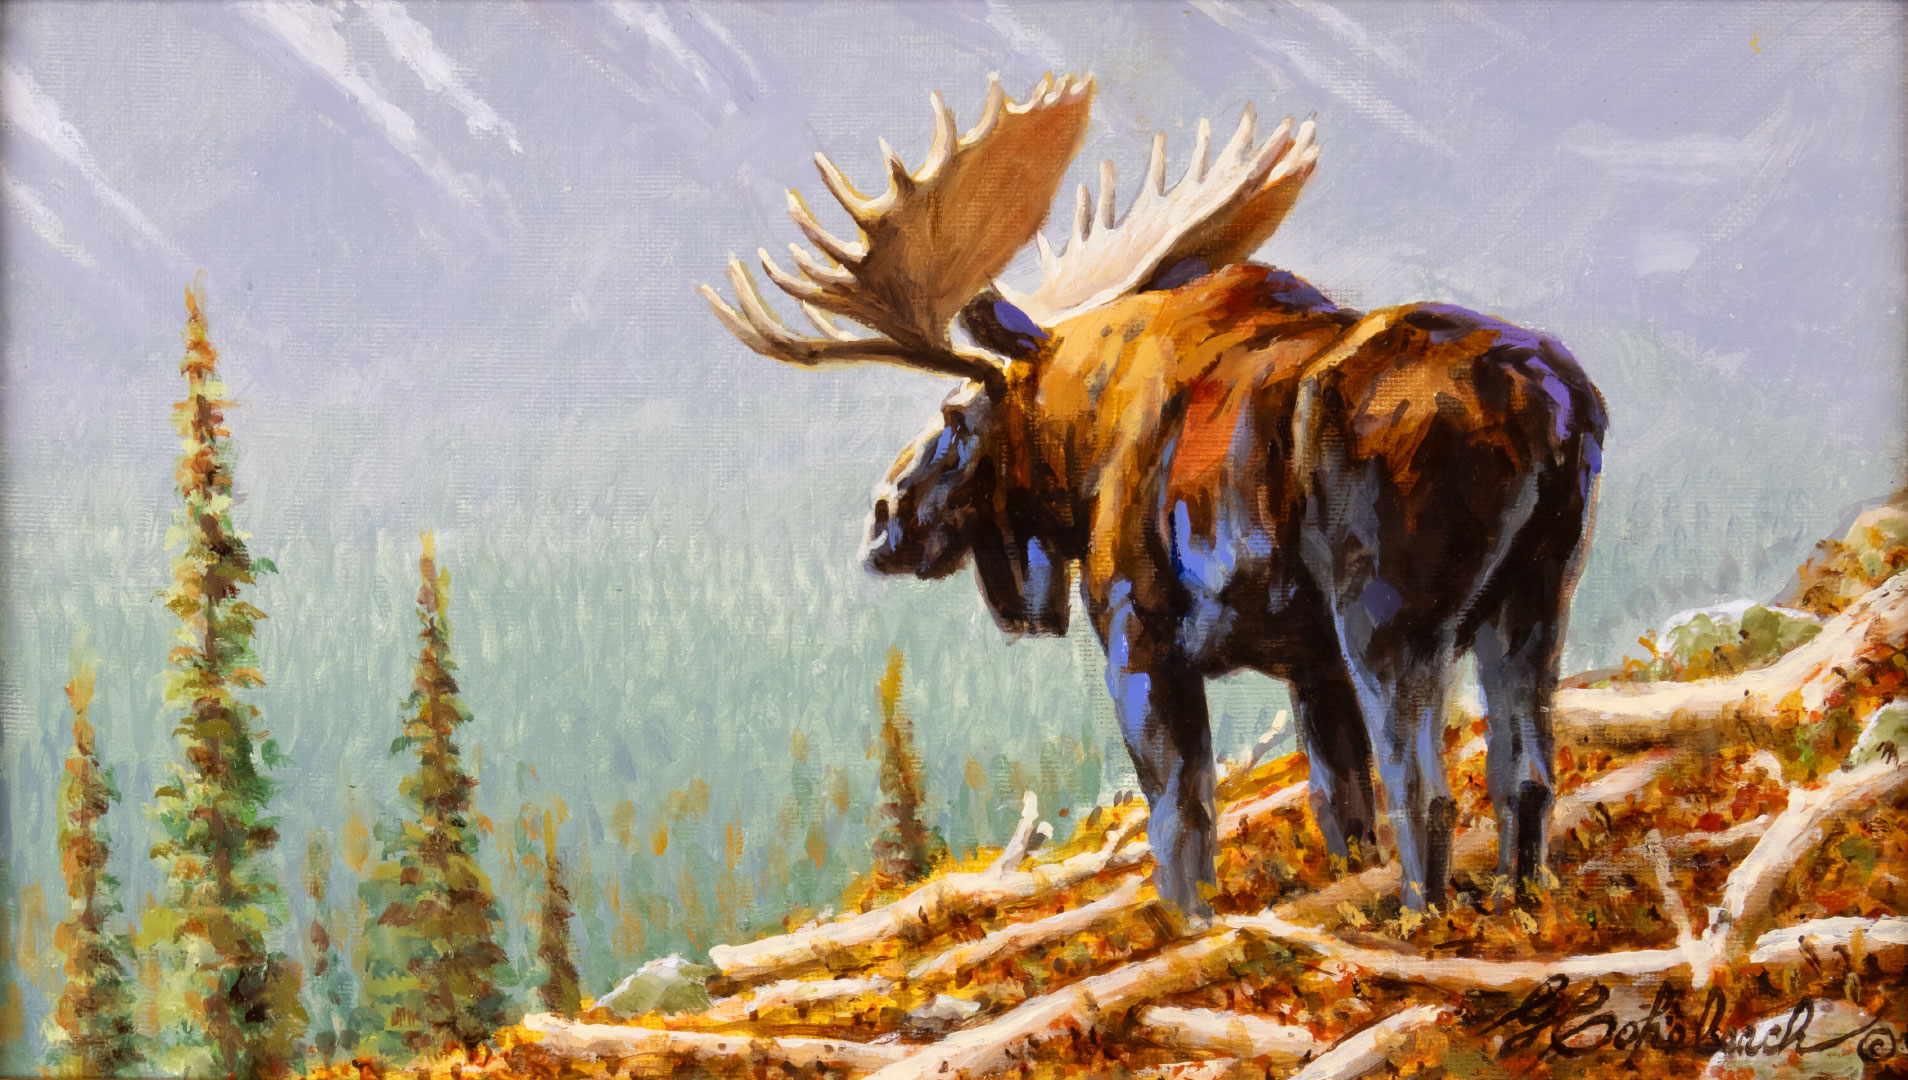 GUY COHELEACH (1933-), MOOSE VALLEY